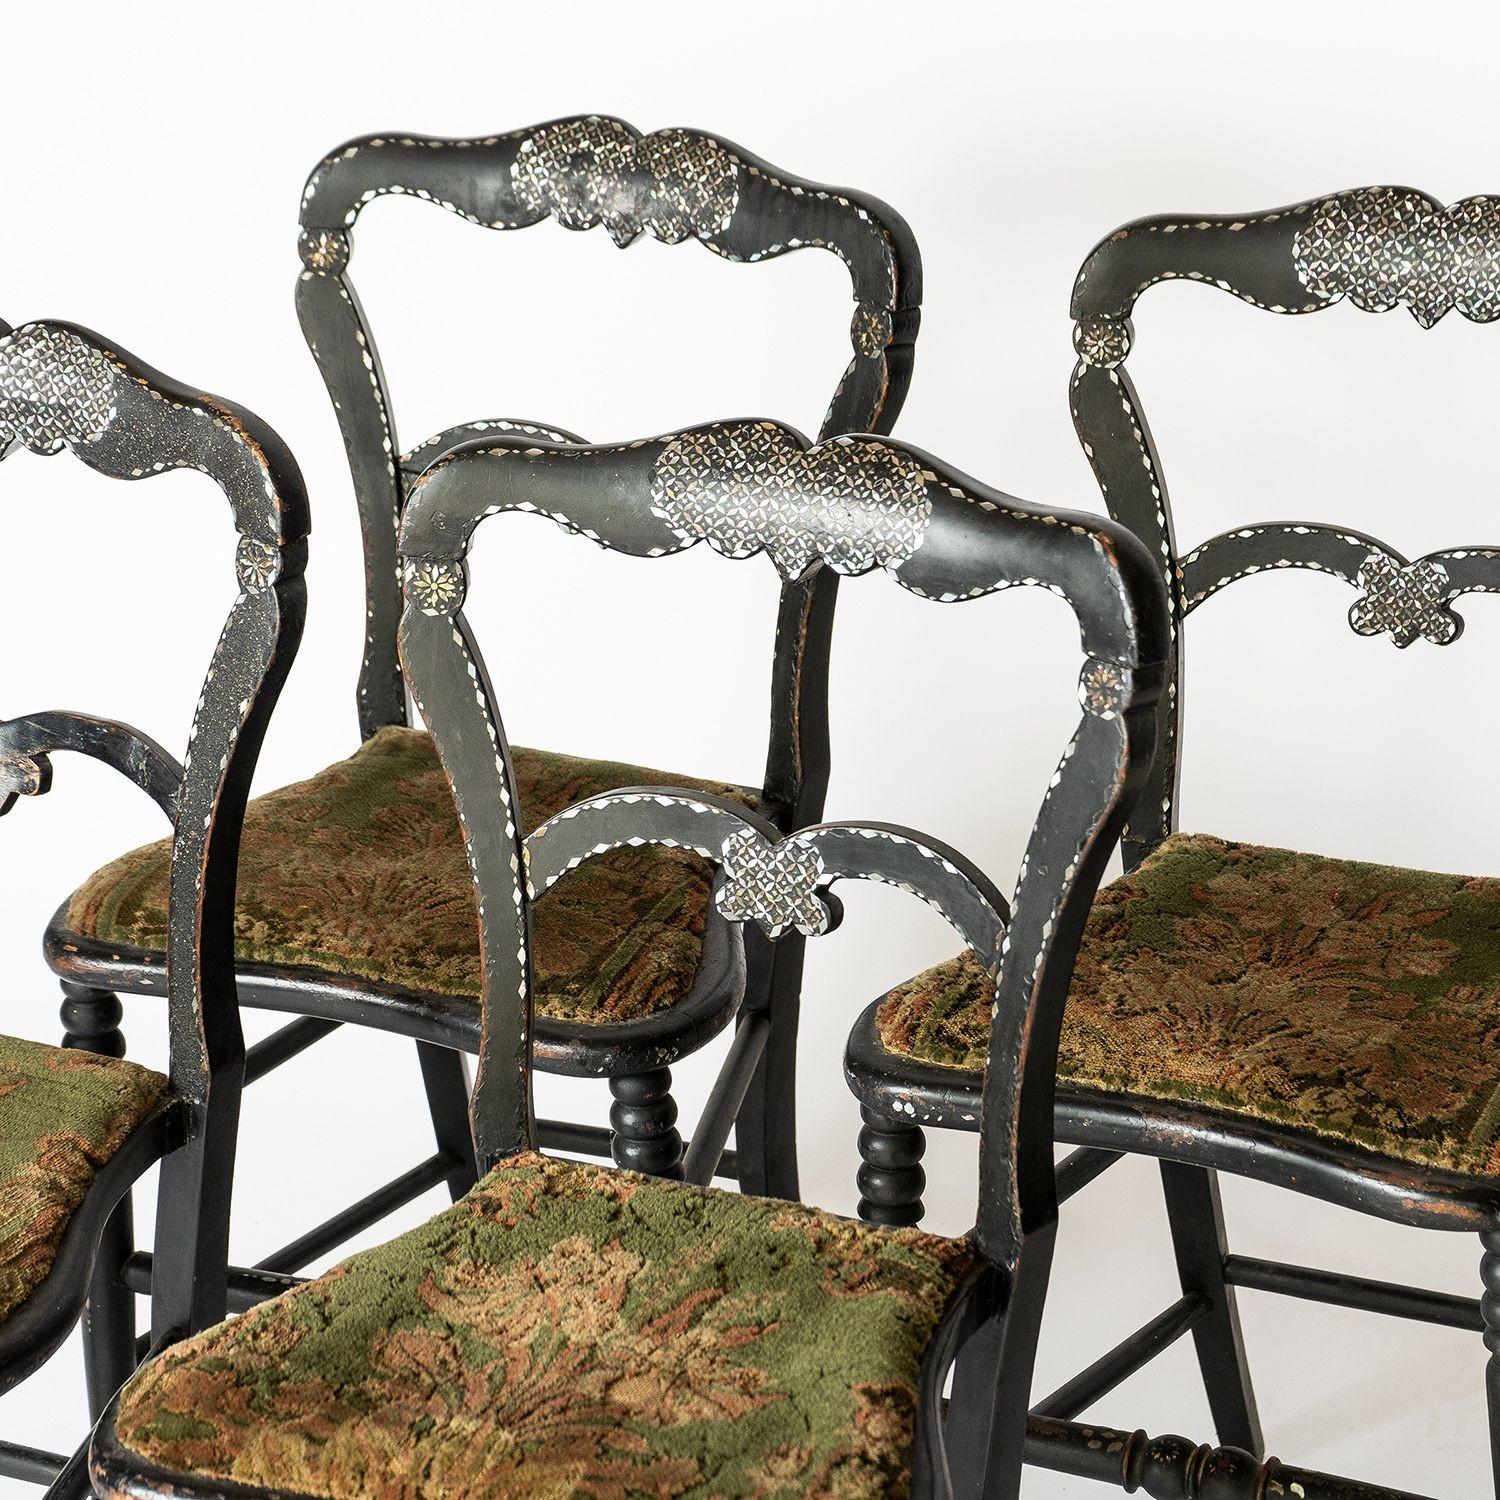 Matching Set of 4 Antique Victorian Parlour/Occasional Chairs

A rare set of matching chairs of this type.

Elegant silhouettes of ebonised wood with inlaid mother-of-pearl decoration.

Victorian green velvet upholstery dating from the late 19th